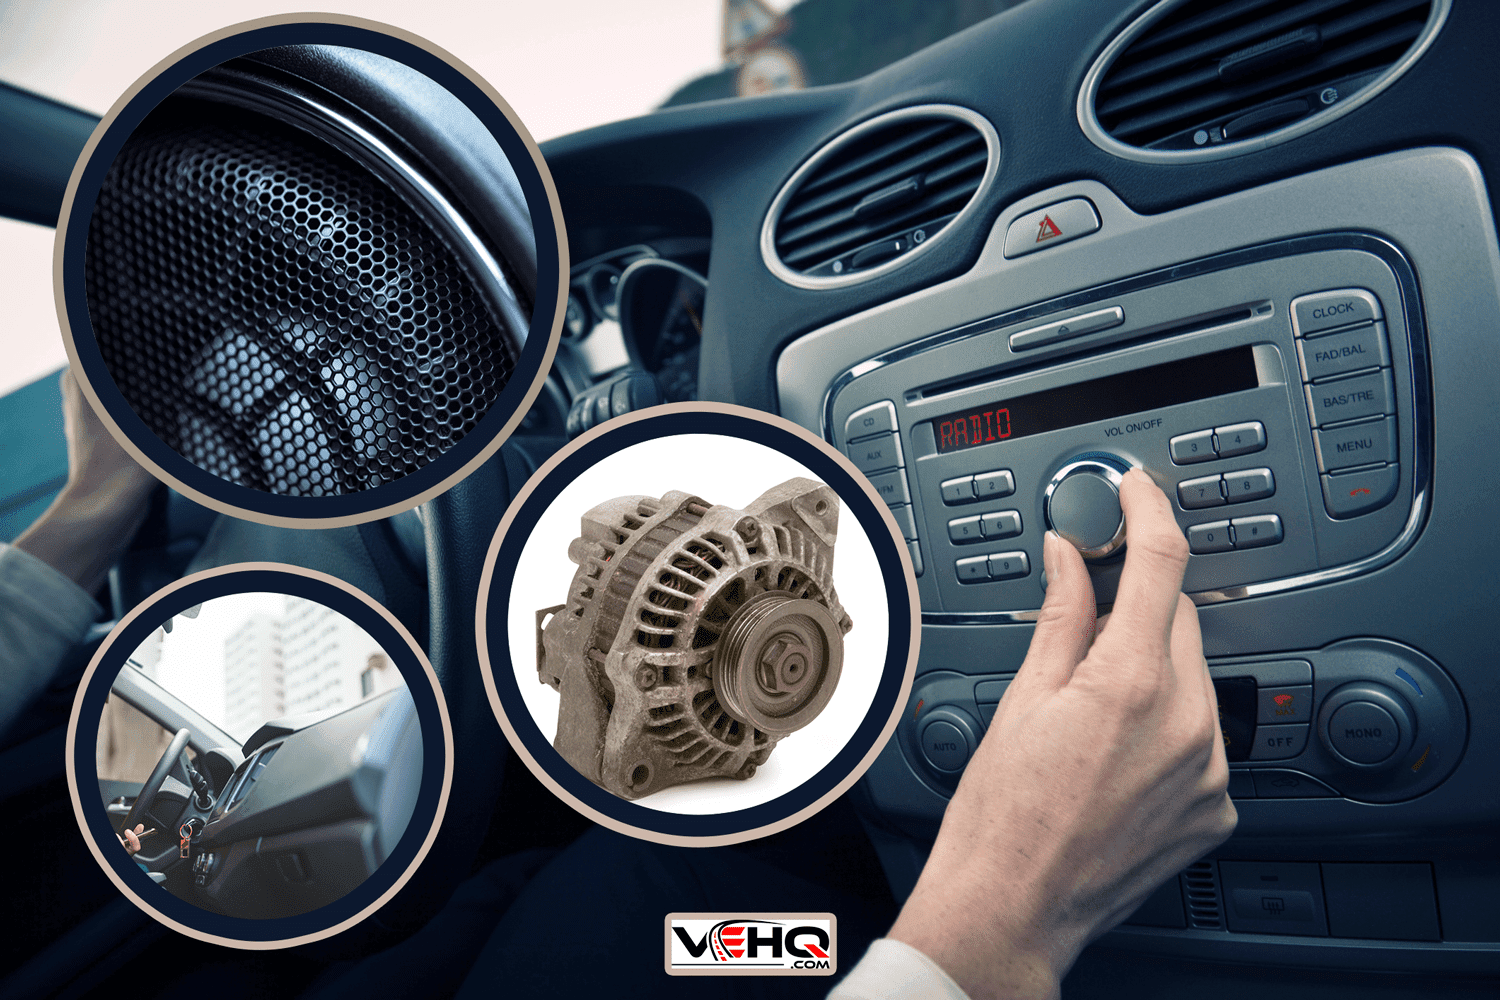 Adjusting the volume of a car radio - Car Radio Volume Goes Down When Braking - What's Wrong